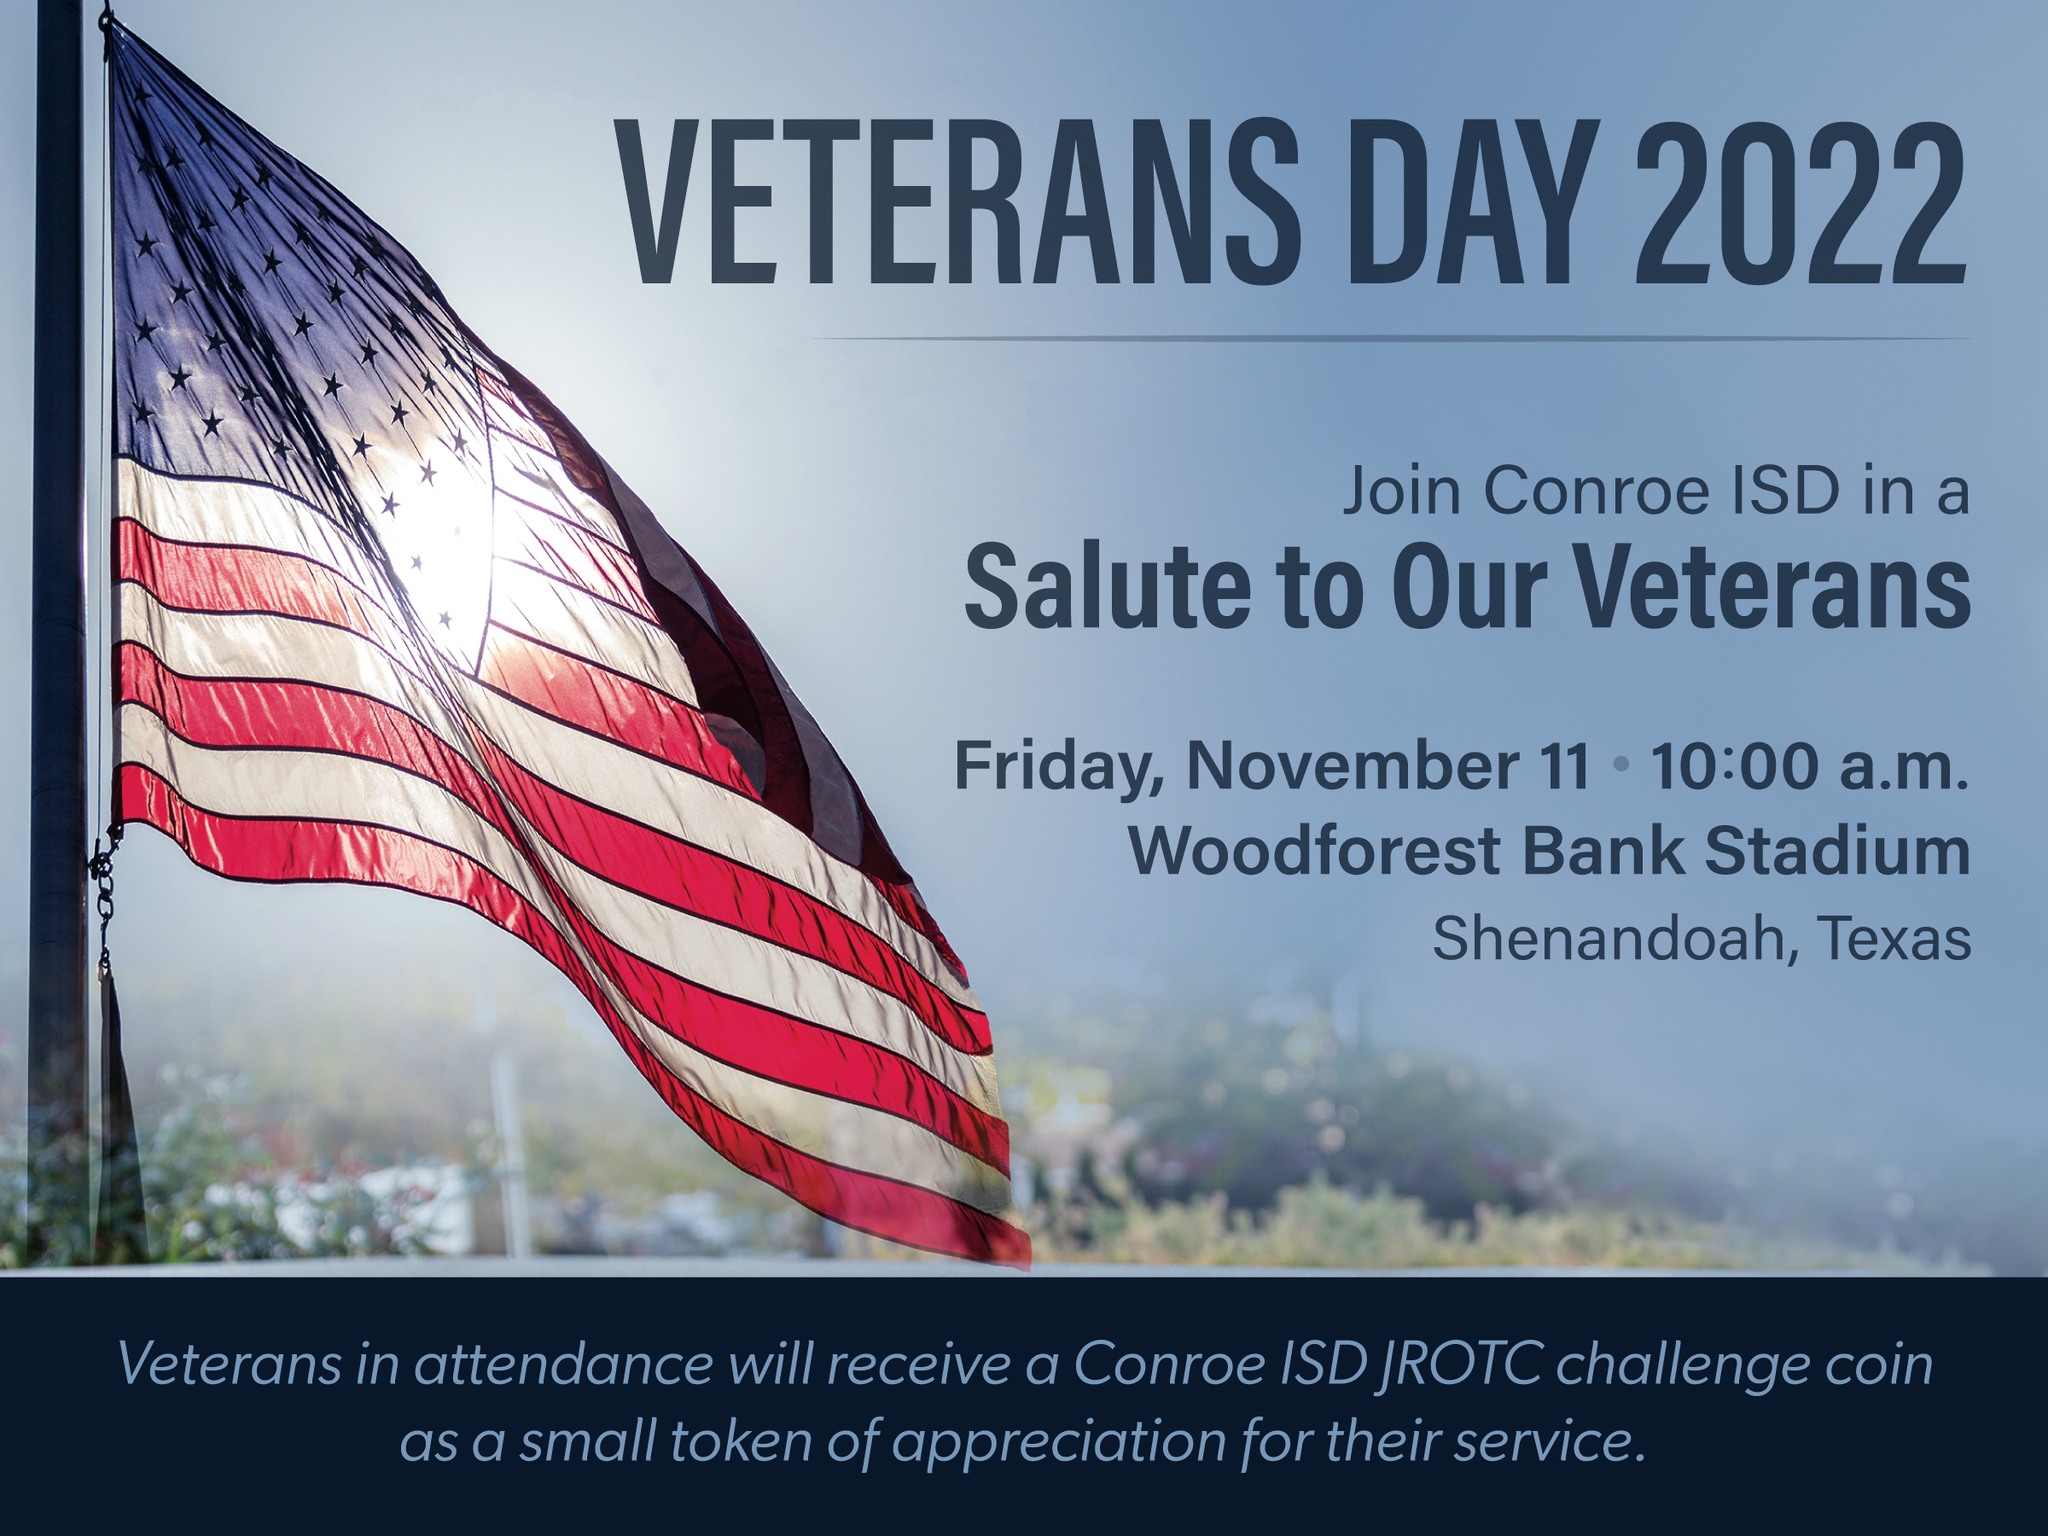 Conroe ISD to host Salute to Our Veterans